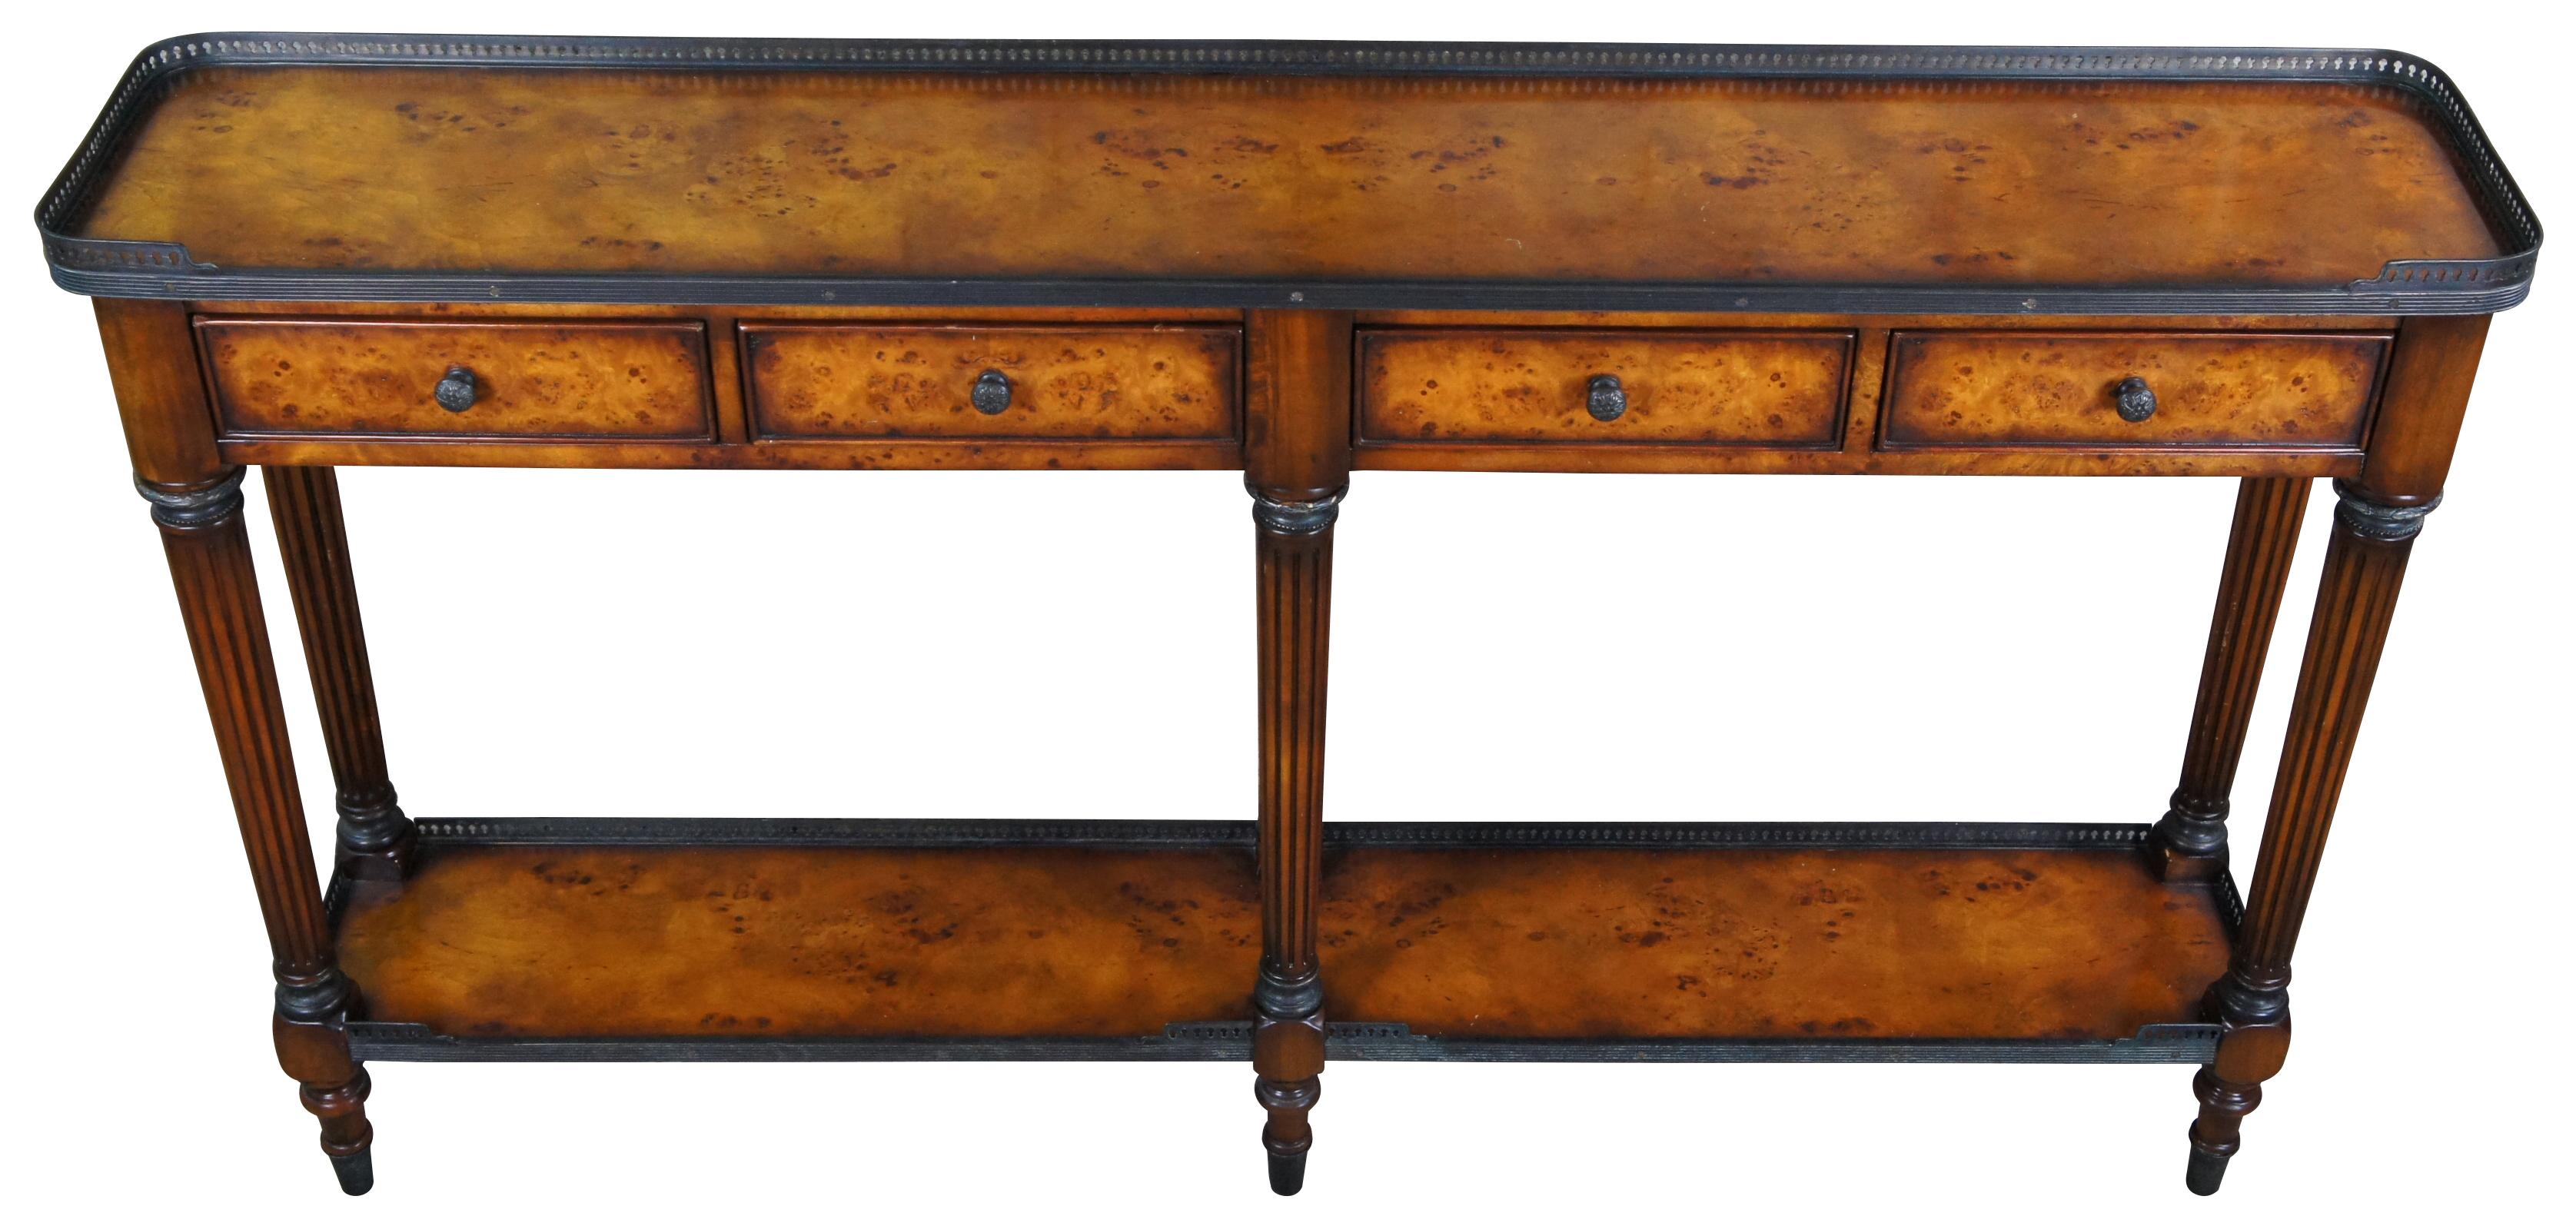 Vintage Theodore Alexander Louis XV style console or sideboard table featuring rectangular form with a narrow profile. The burl veneer and acacia console table has rounded corners and a brass gallery, above four frieze drawers, supported on six